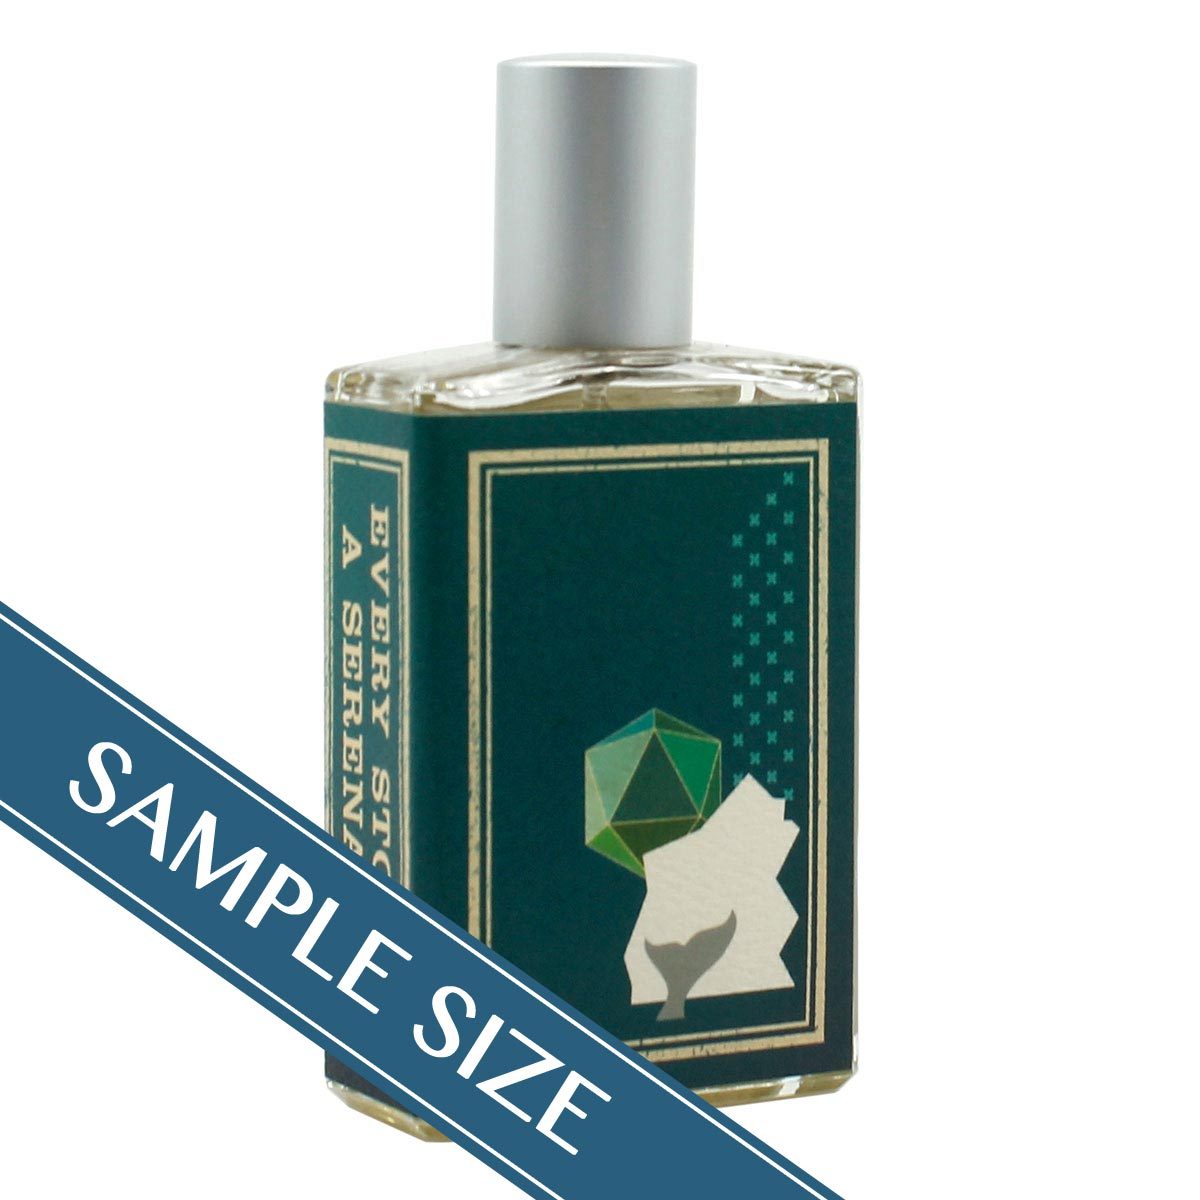 Primary image of Sample - Every Storm A Serenade EDP